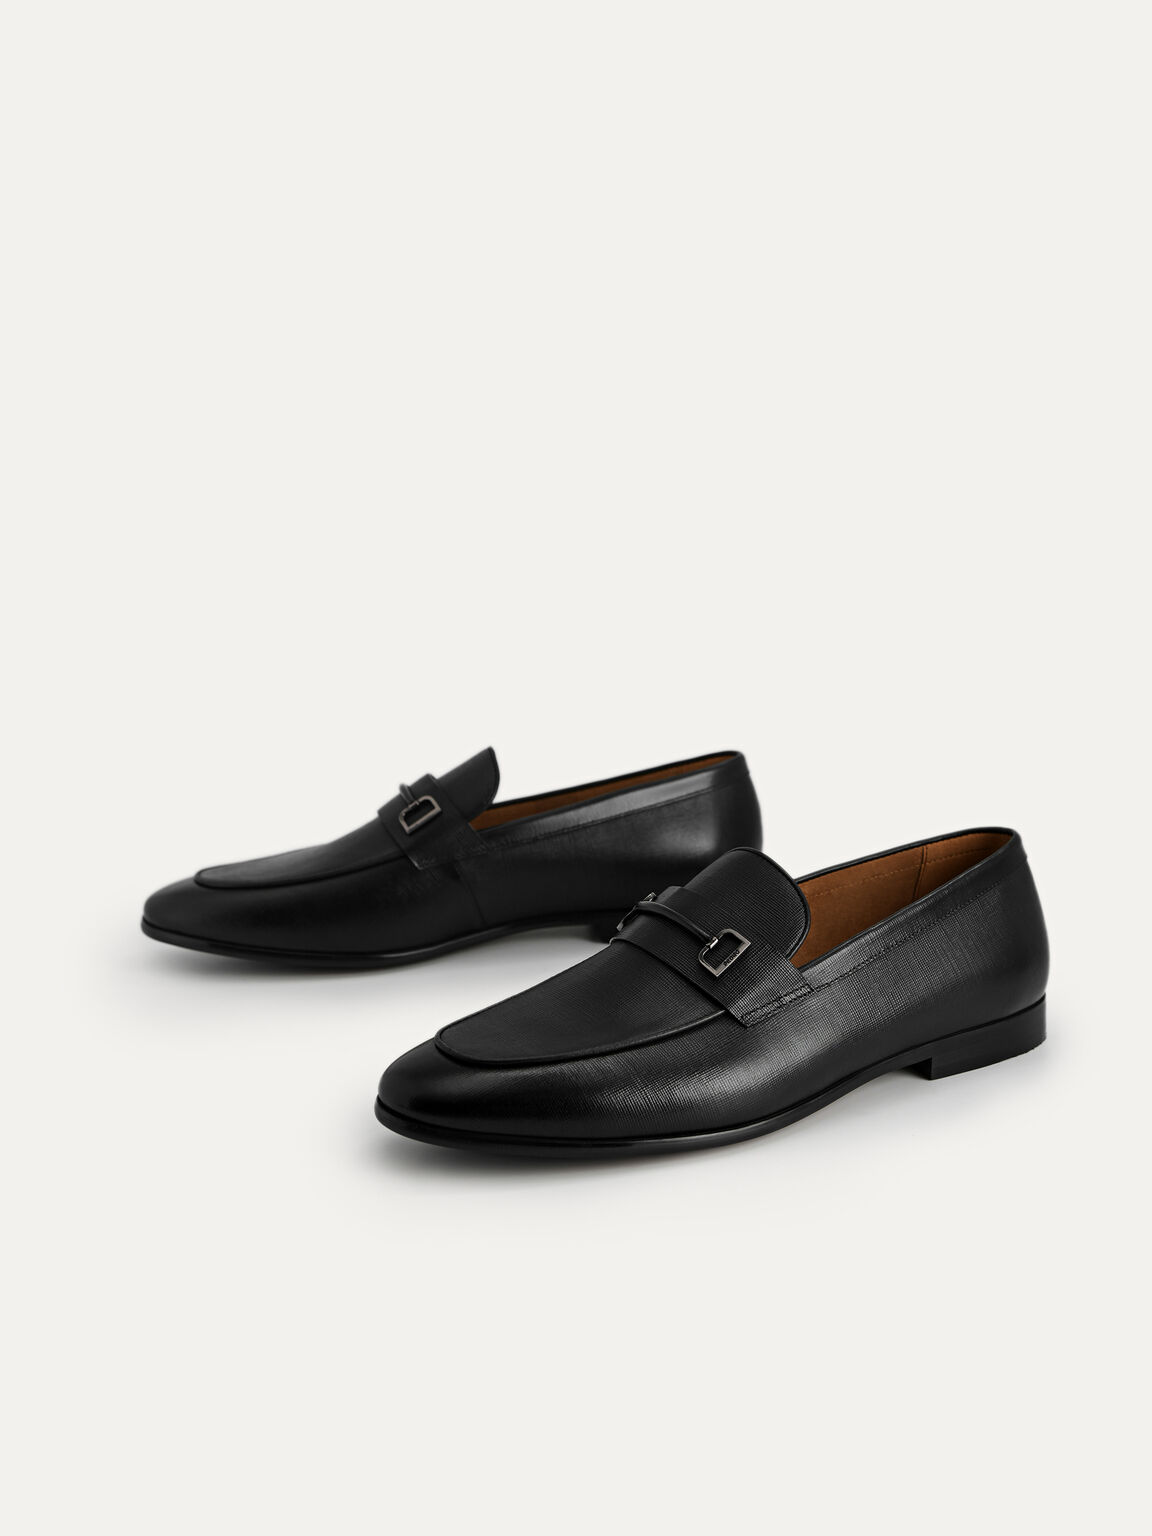 Black Textured Leather Loafers with Metal Bit - PEDRO PH